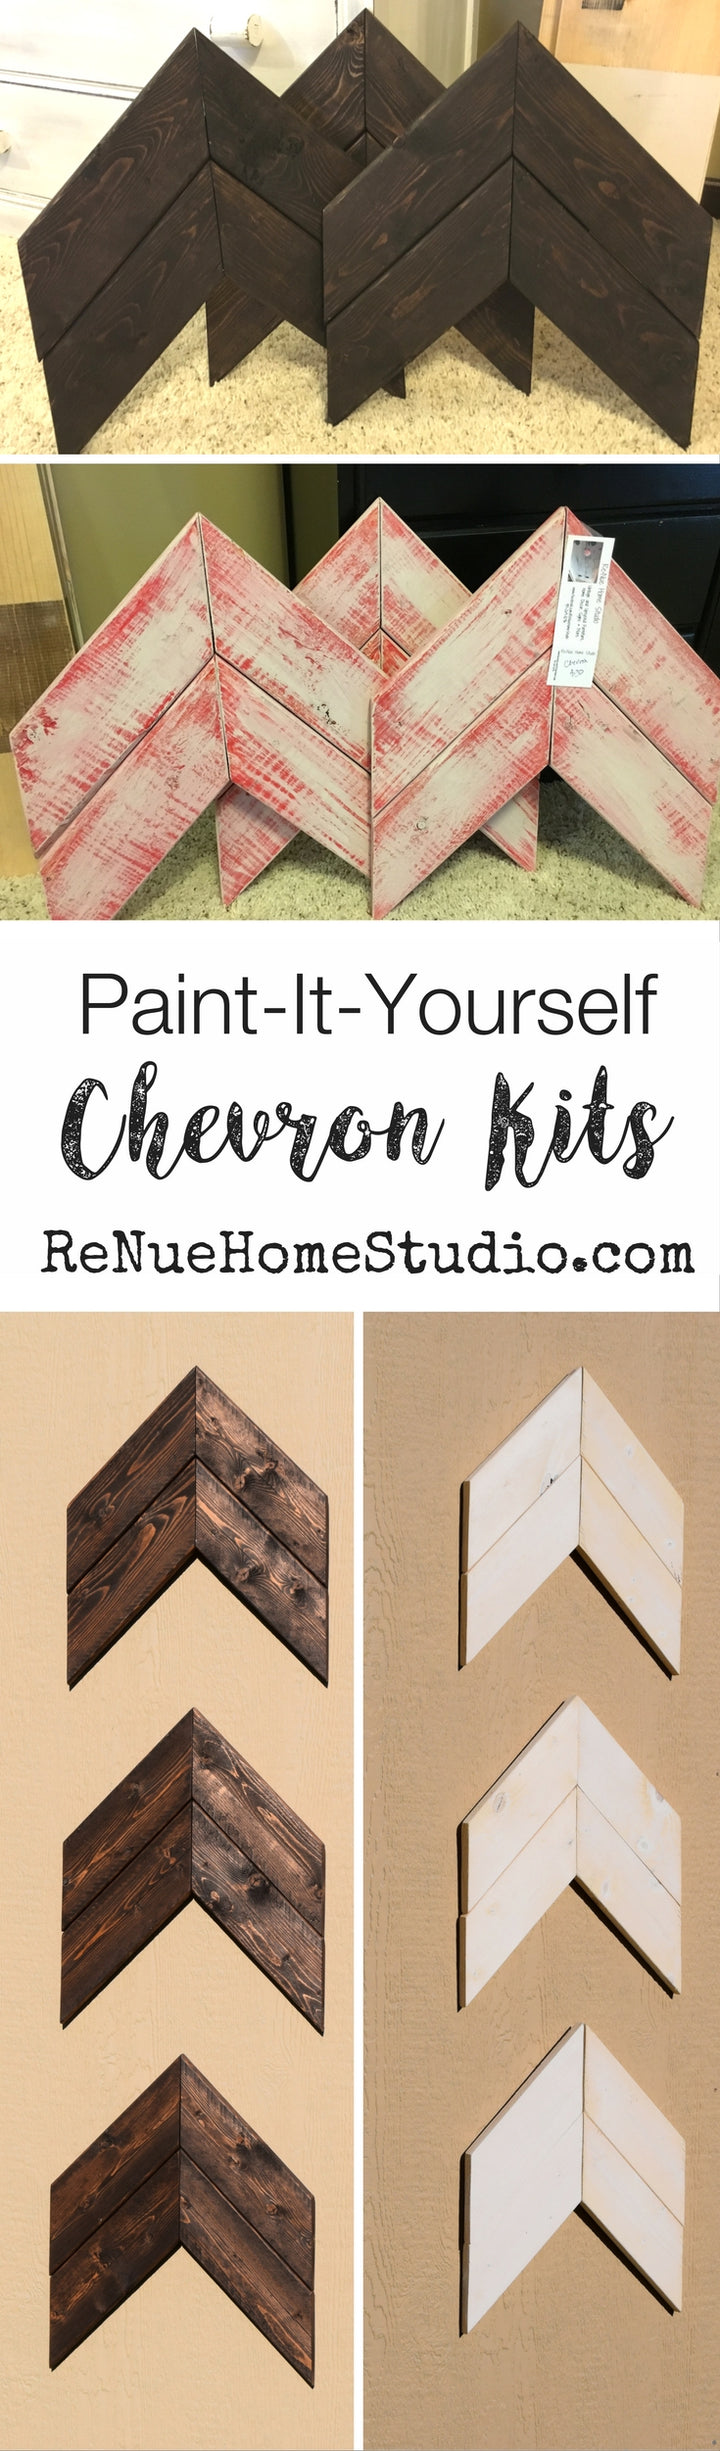 Make Your Own Chevron Kit - Just Paint or Stain